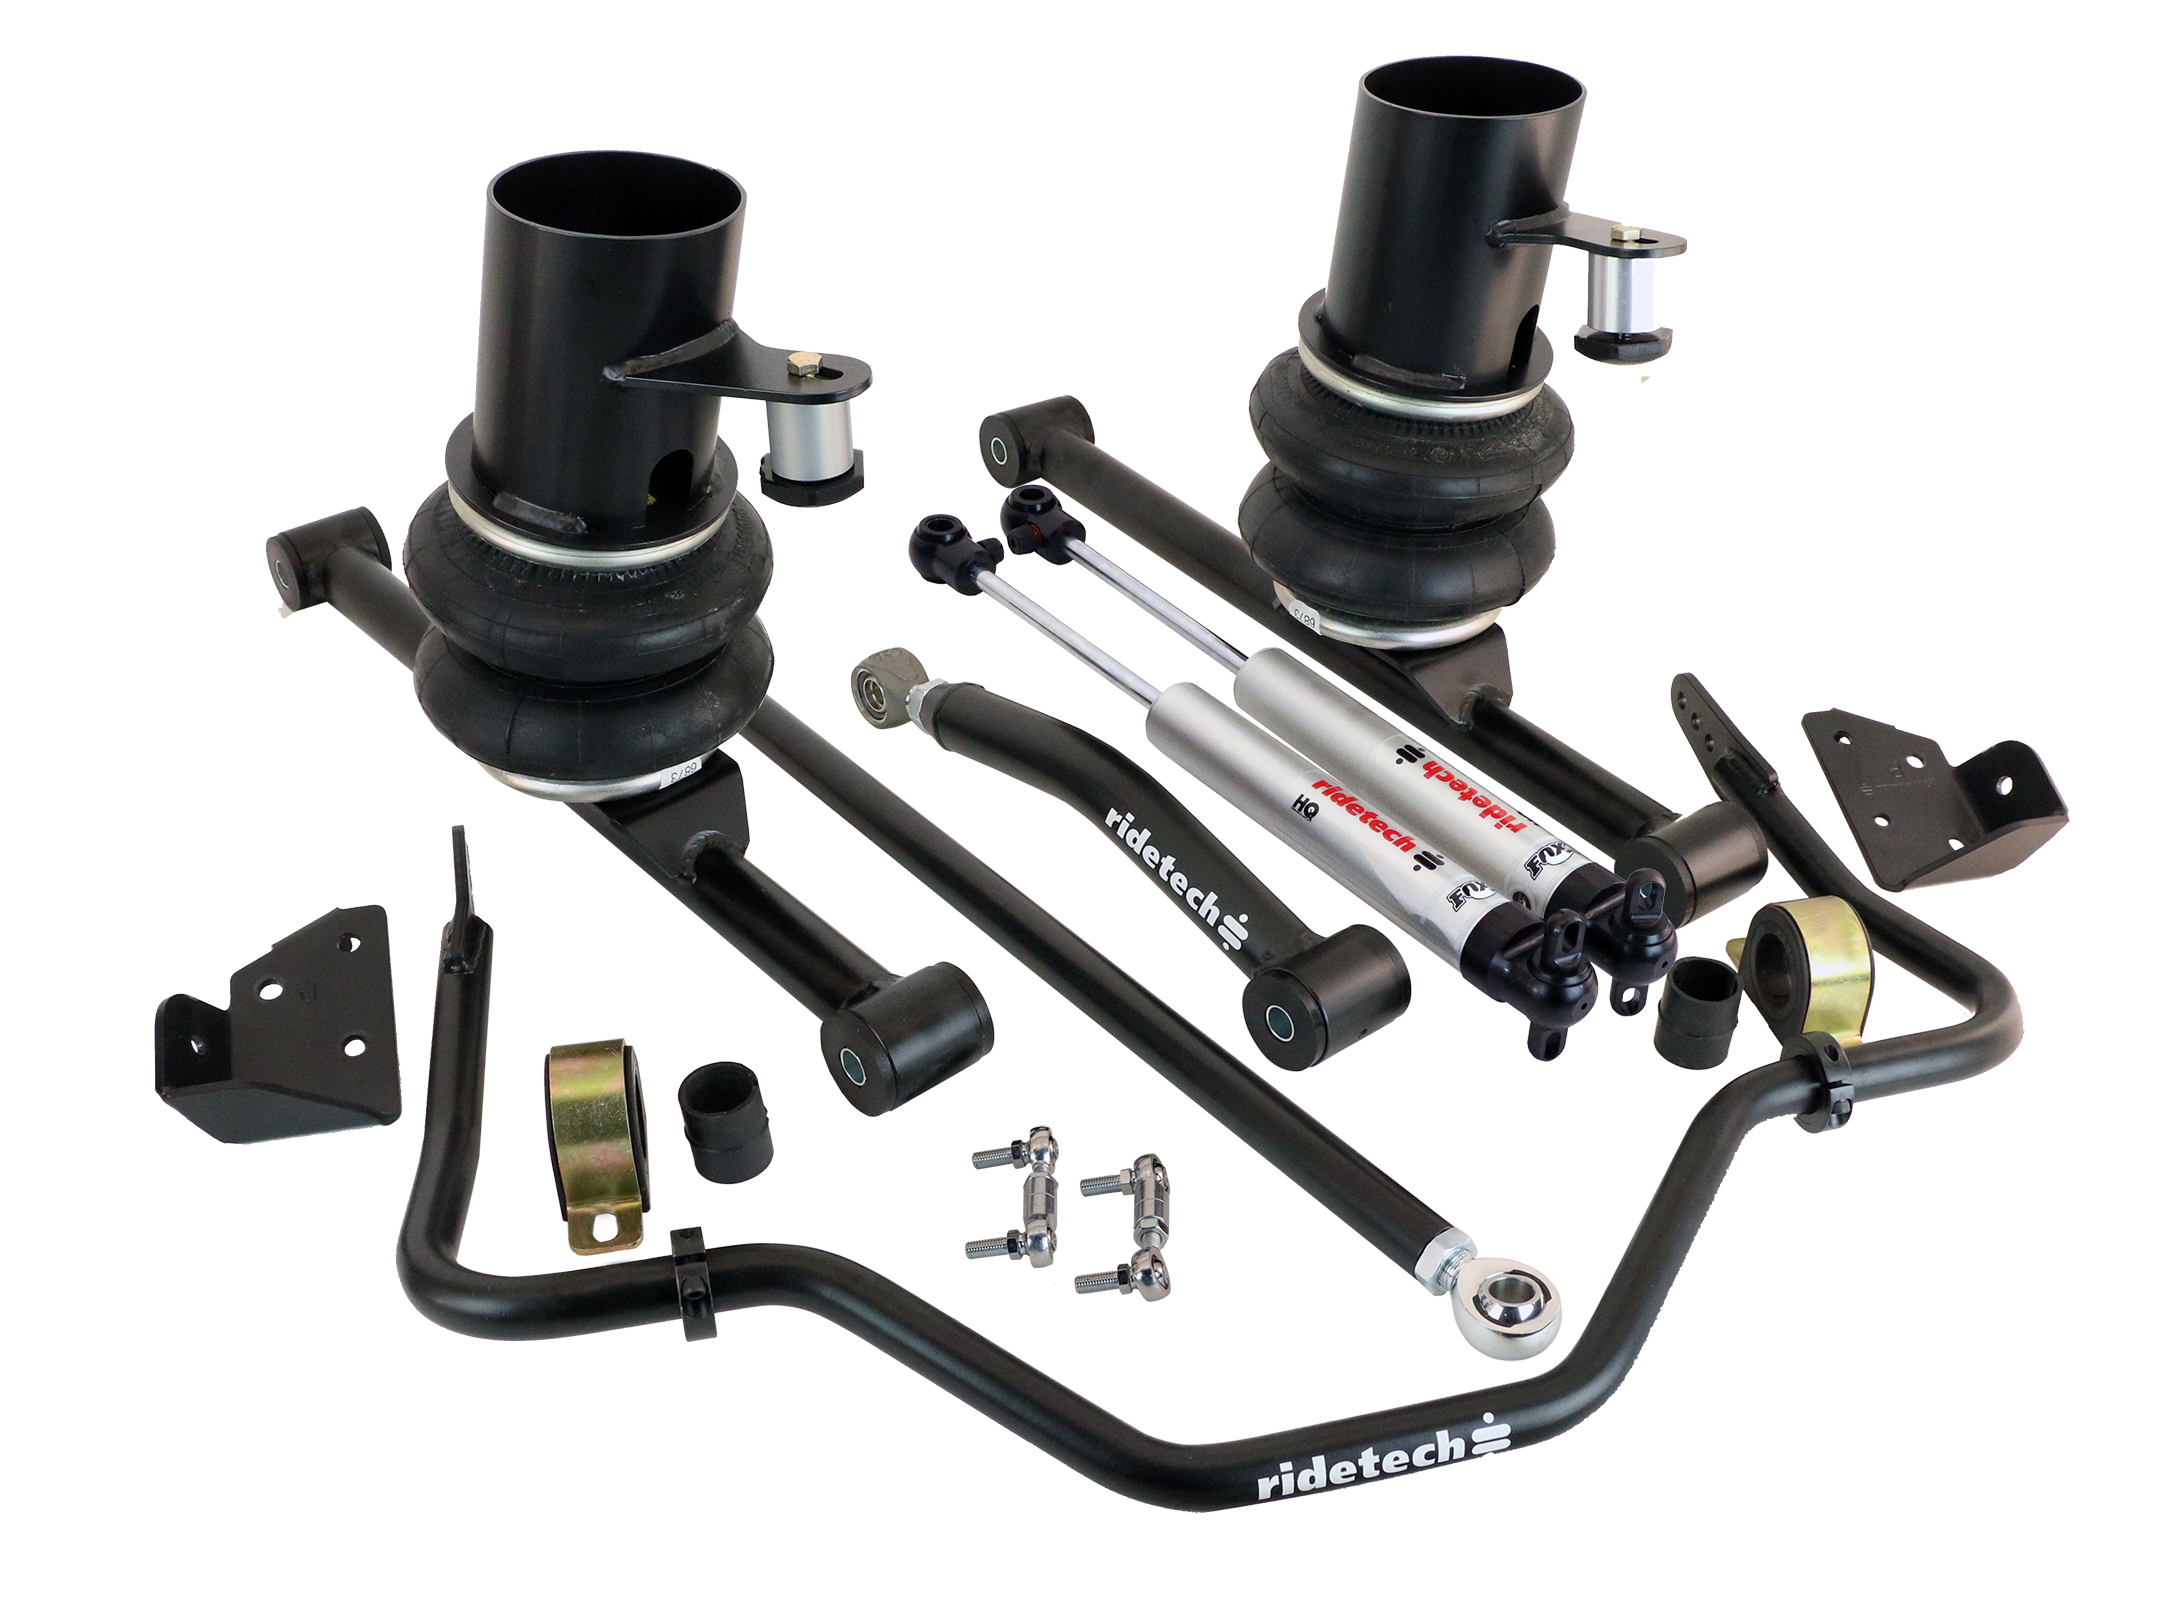 Ridetech Air Suspension System,fits 1959-1964 Impala,control arms,sway bars,hd 